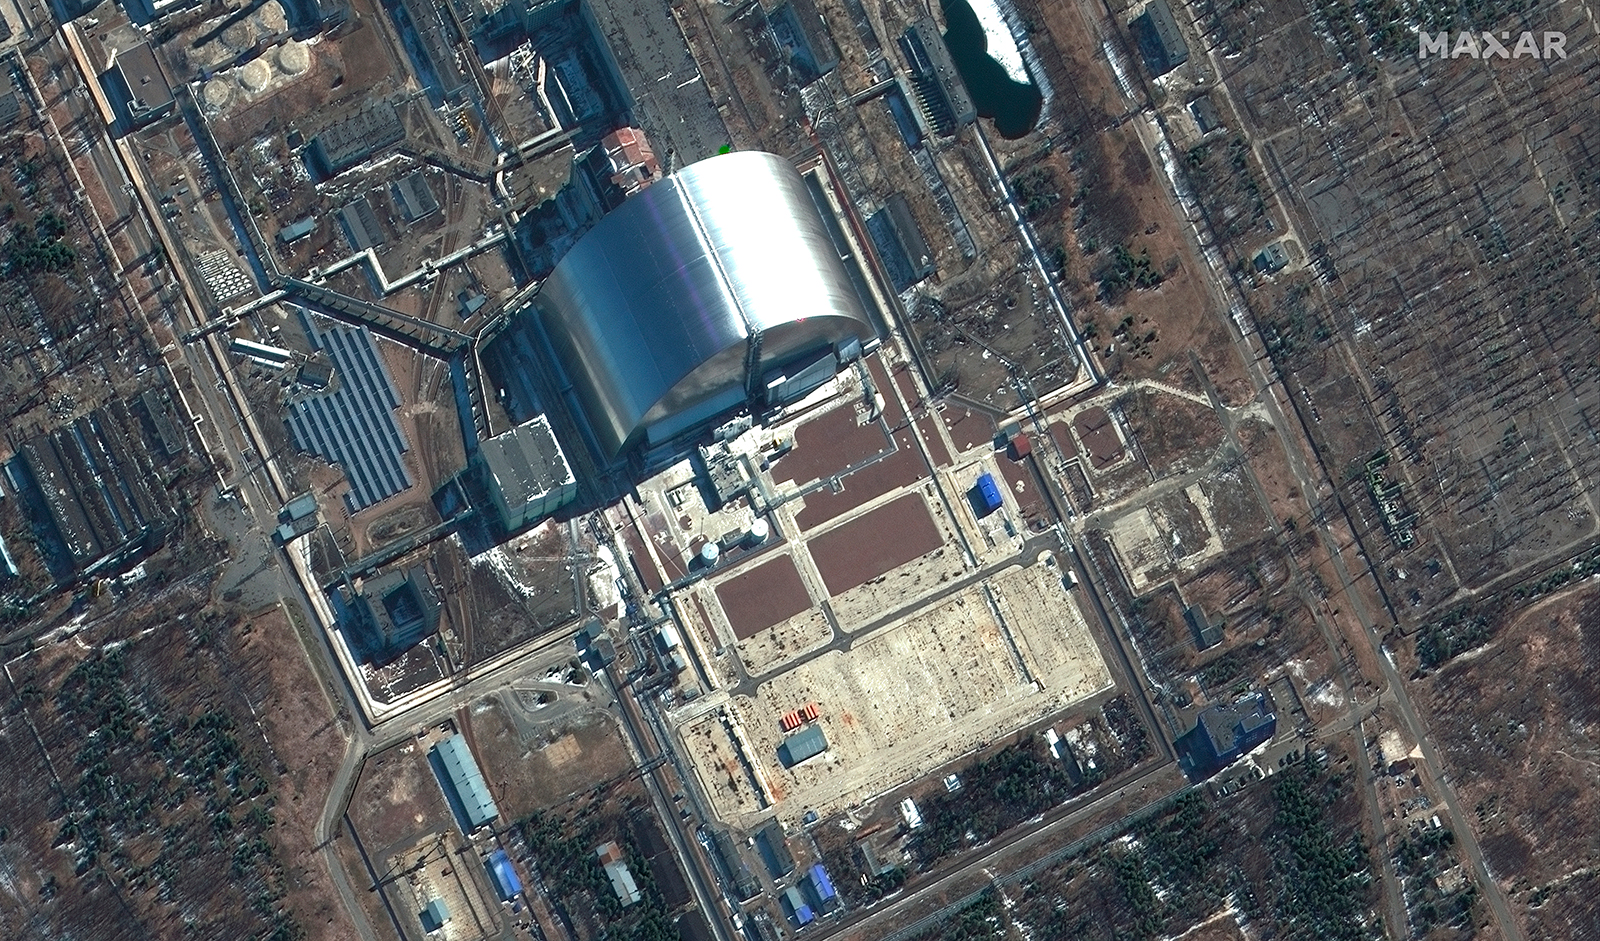 This satellite image provided by Maxar Technologies shows a close view of Chernobyl nuclear facilities, Ukraine, during the Russian invasion, Thursday, March 10.